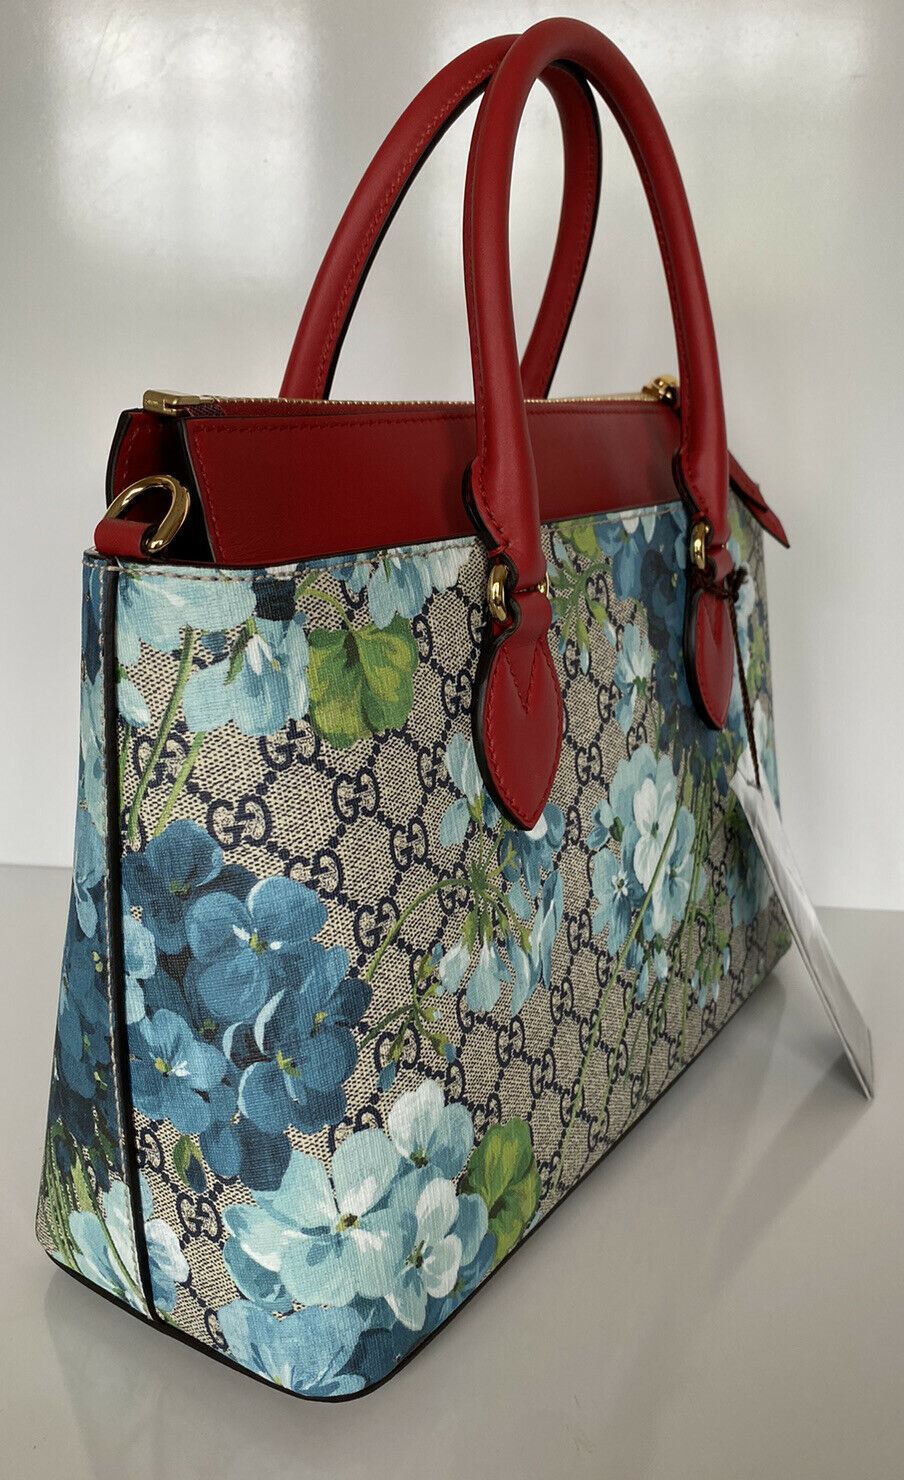 Gucci GG Supreme Blossom Red/Blue Leather Tote Bag Italy